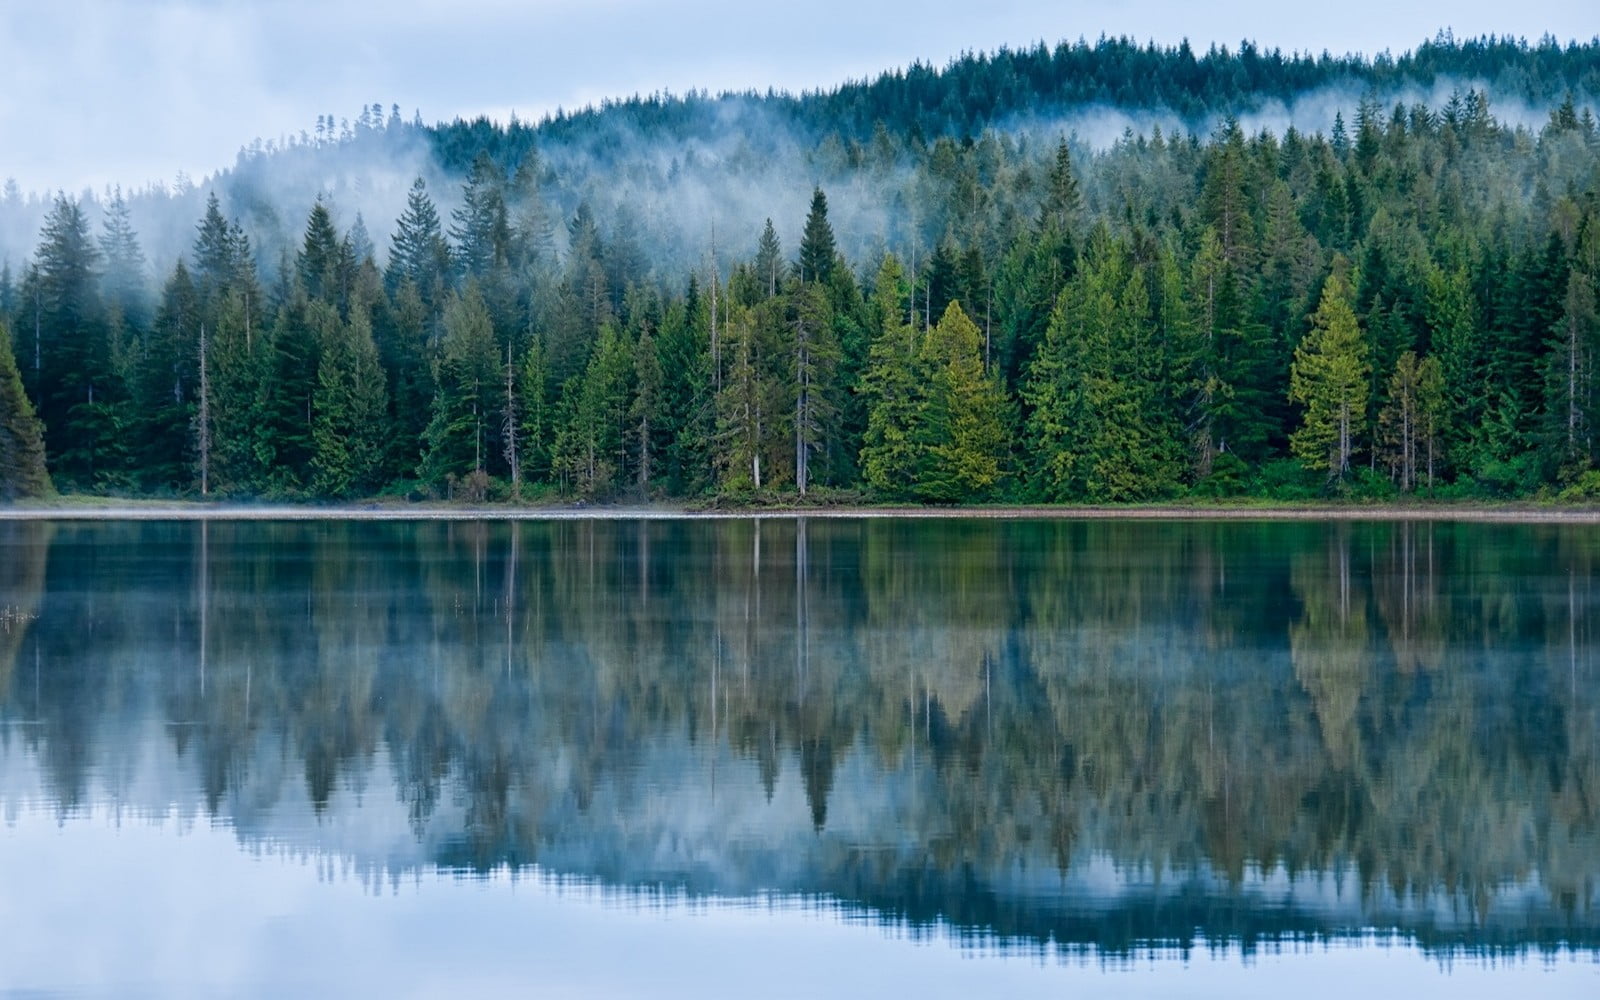 pine tree lot, mist, reflection, lake, forest, water, blue, trees